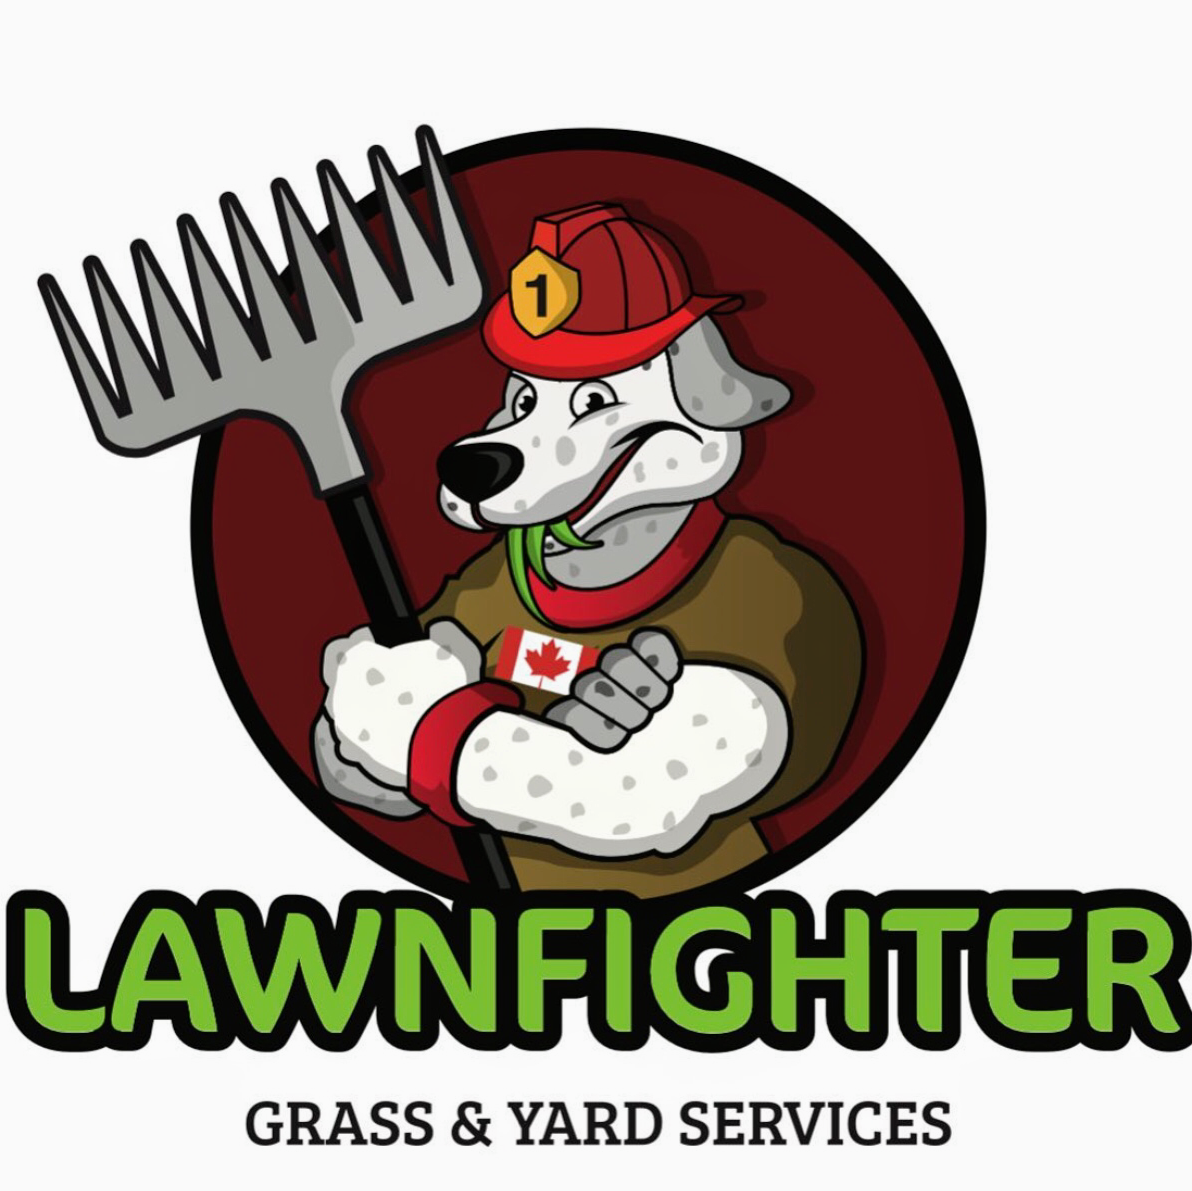 LawnFighter Grass & Yard Services